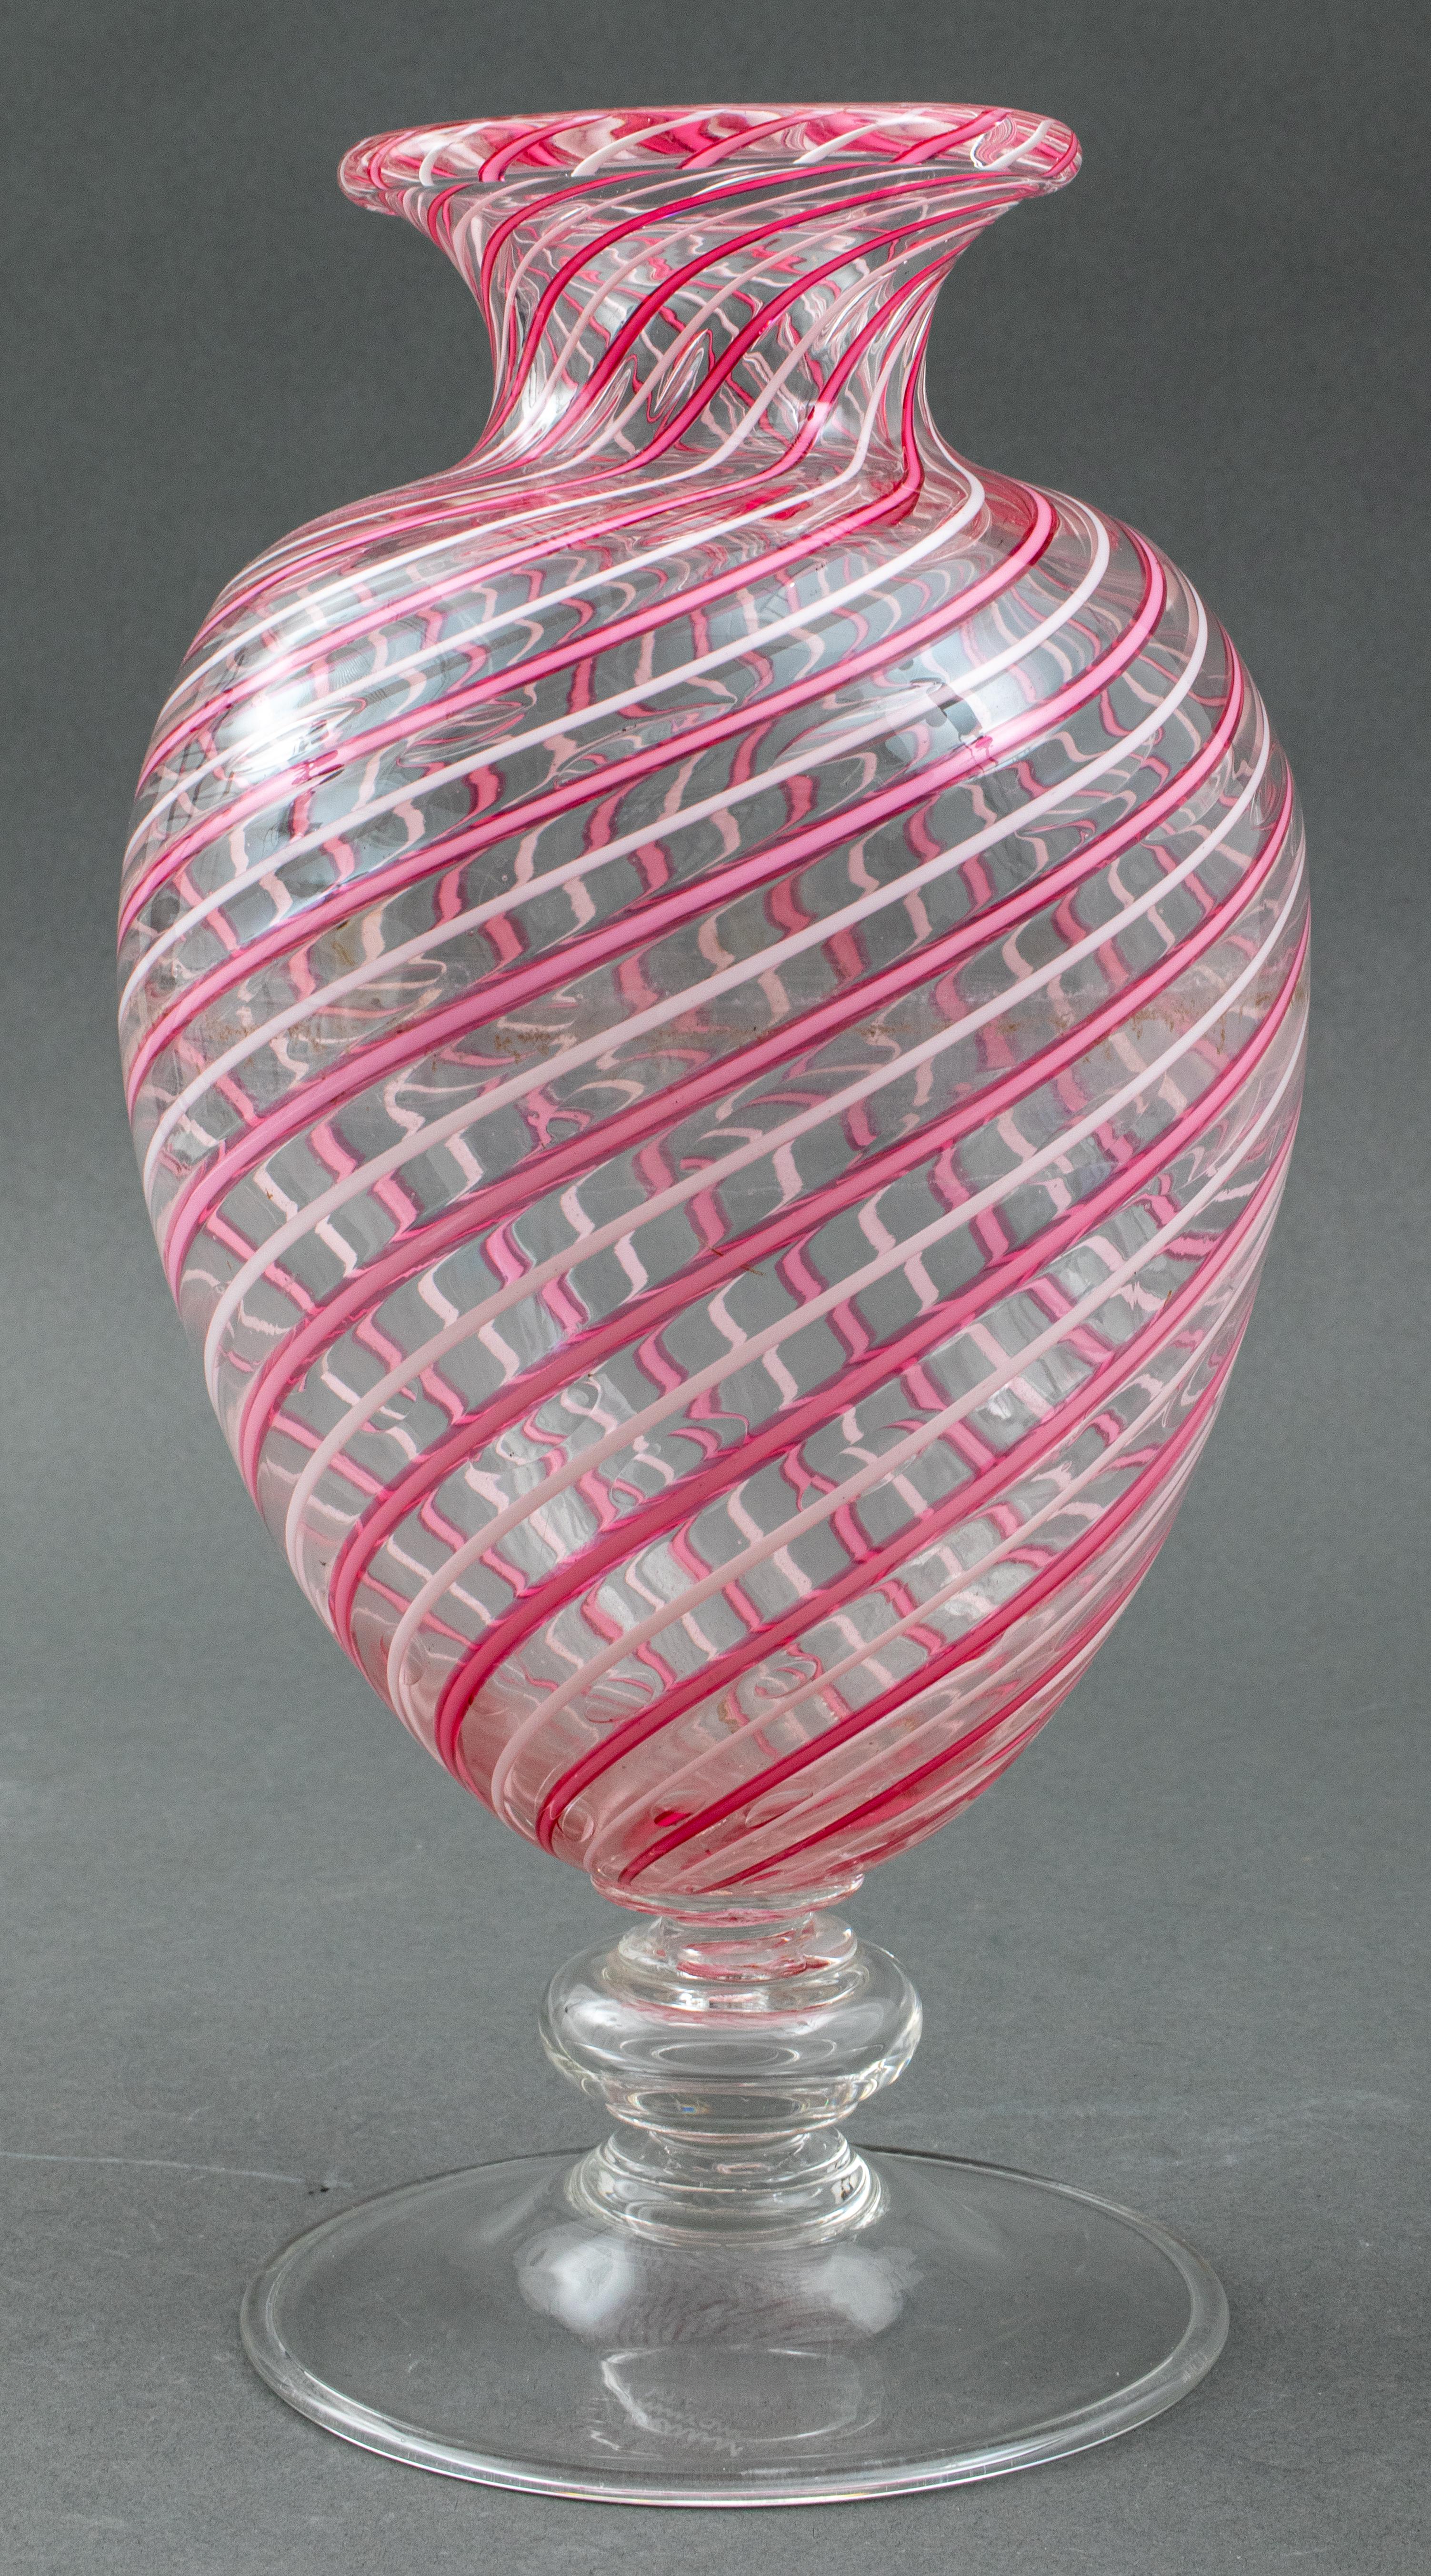 Italian Murano art glass 'Veronese' baluster shape vase by Vittorio Zecchin for Venini, twisted clear, white and pink glass with controlled bubble inclusions, marked 'Venini Murano Italia' on the bottom, circa 1925. 11.75